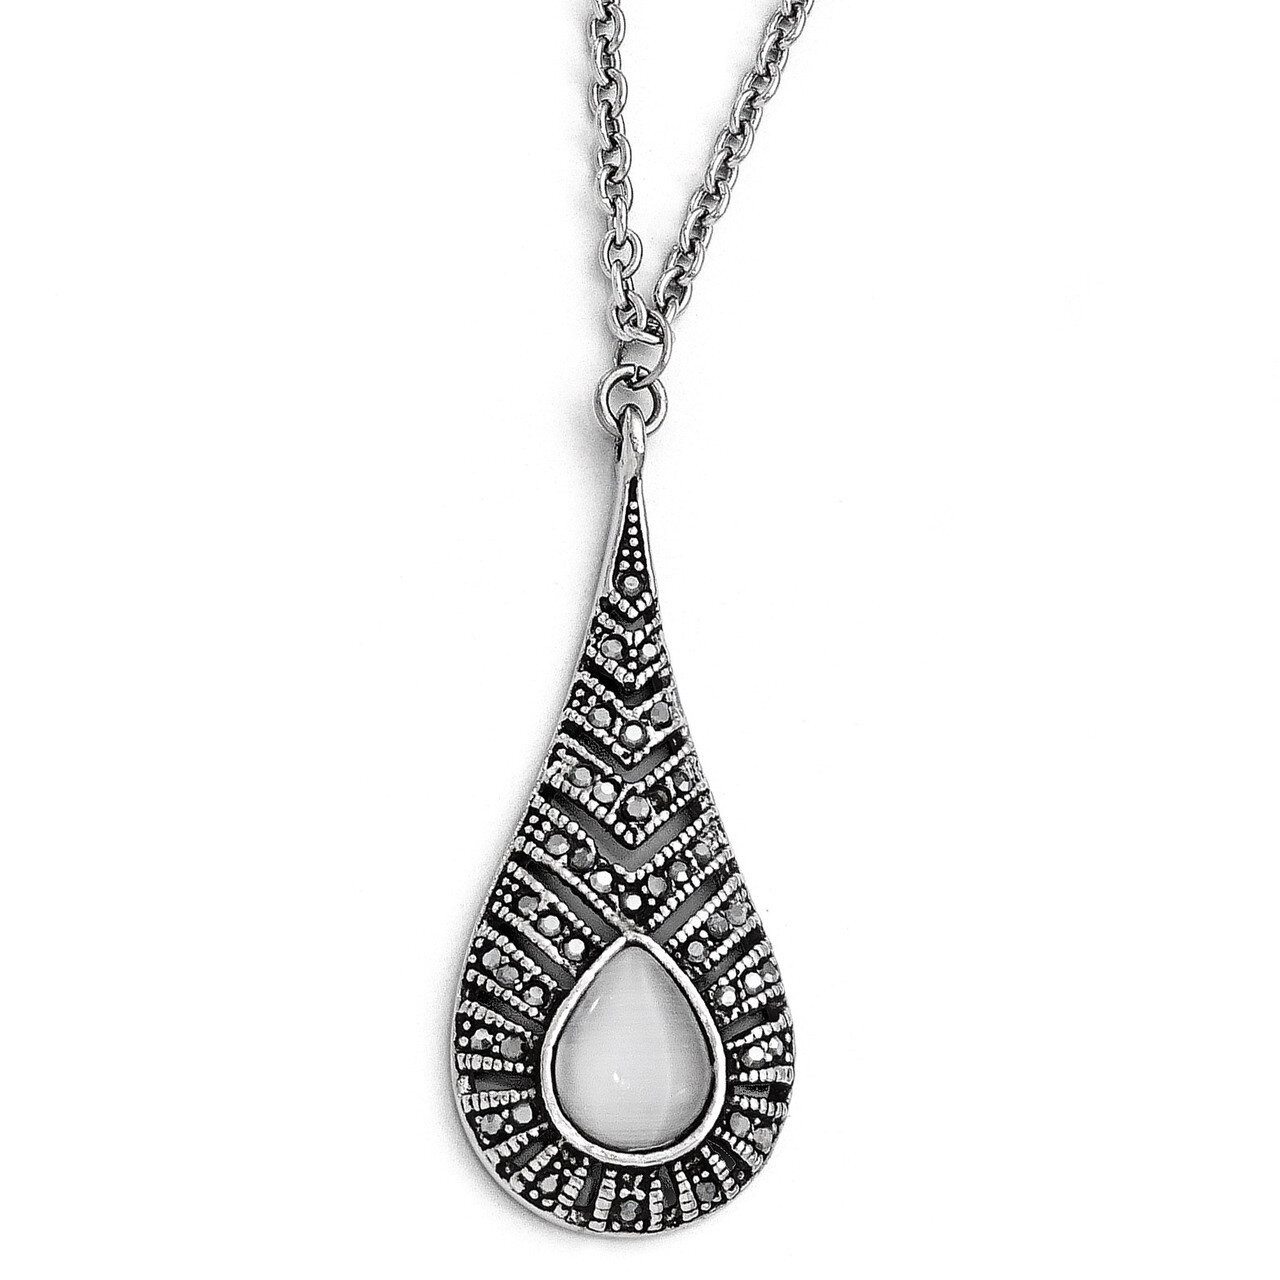 Polished Marcasite Cat's Eye Necklace - Stainless Steel SRN1780-18